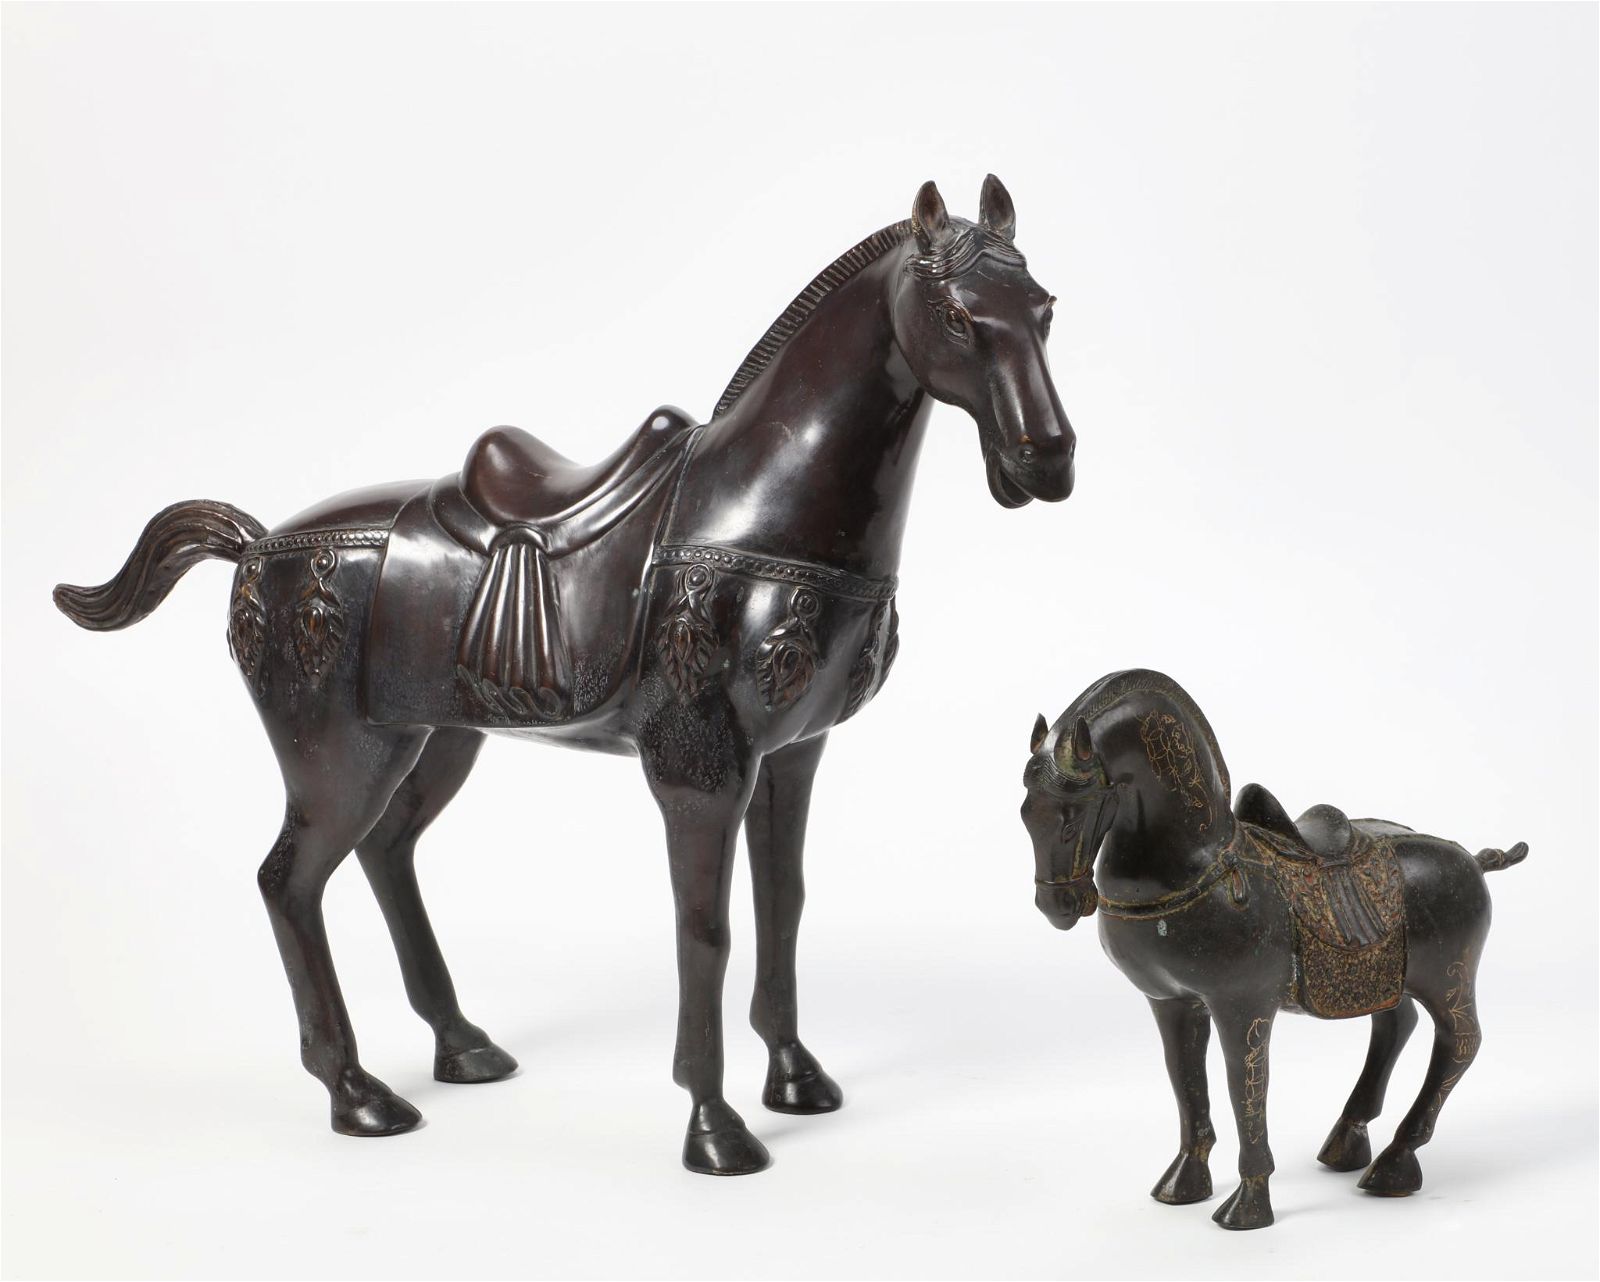 TWO CHINESE BRONZE MODELS OF HORSESTwo 2fb28d6